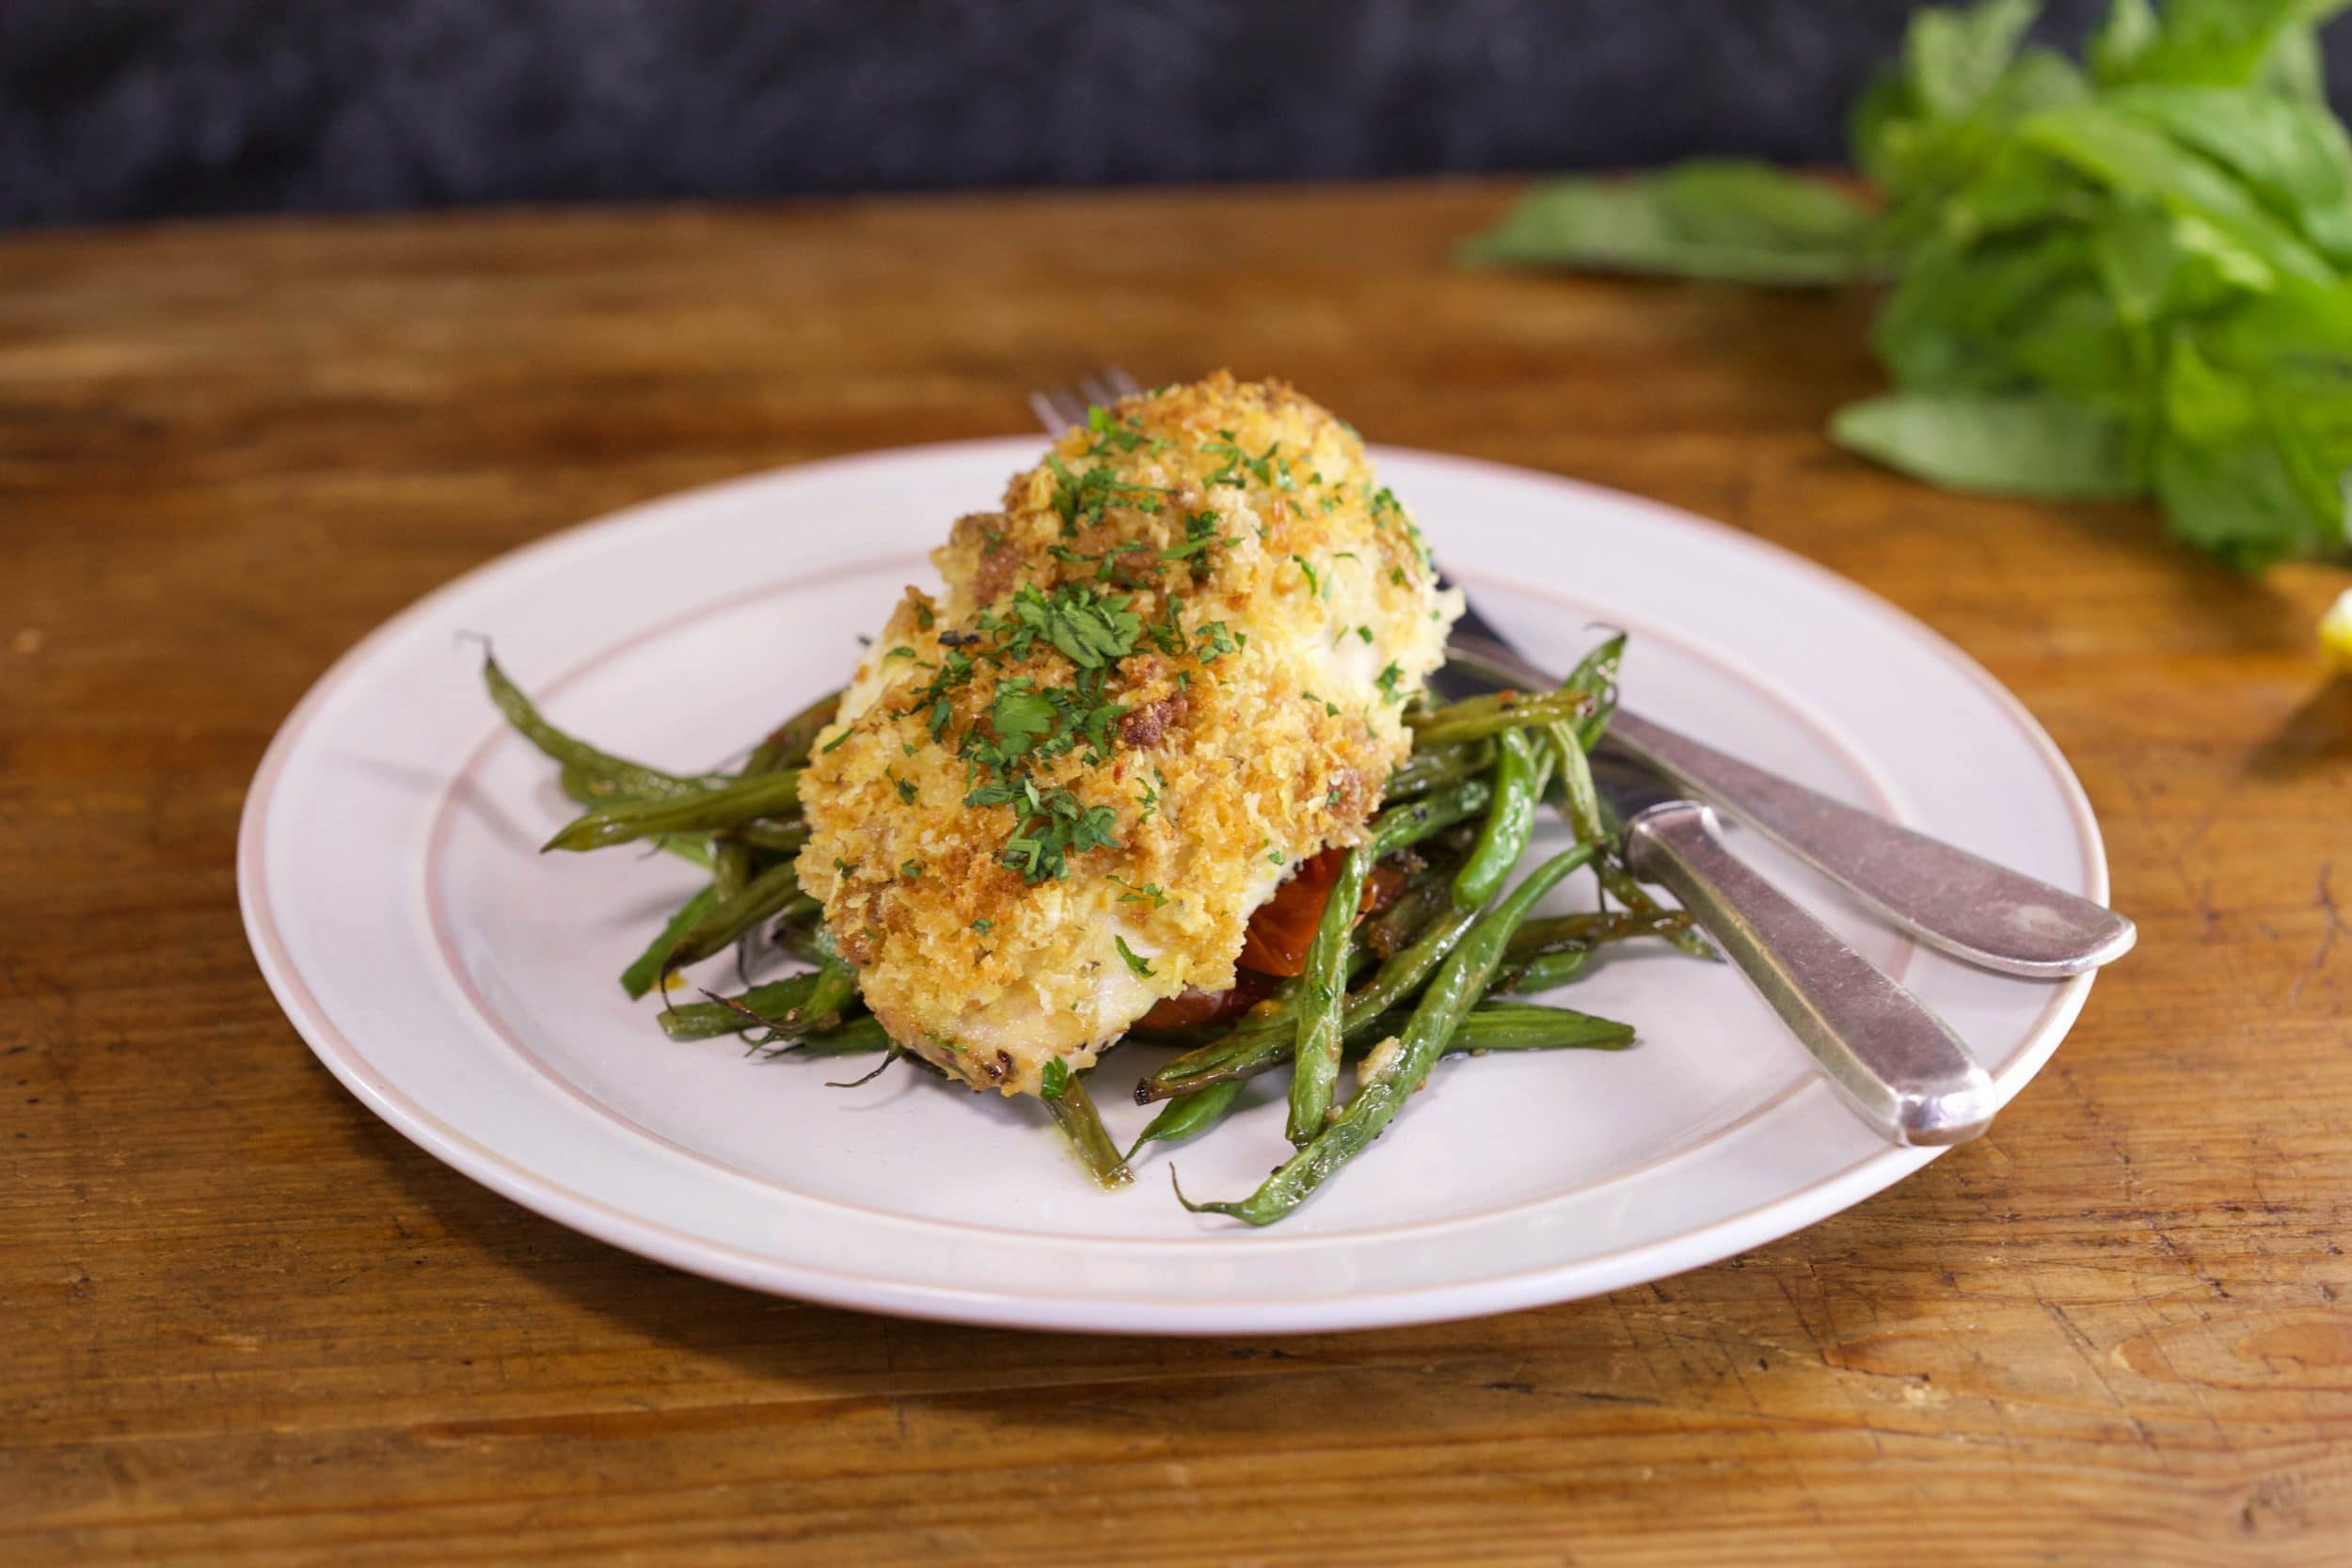 Chicken or Fish with Lemon-Parm Crust